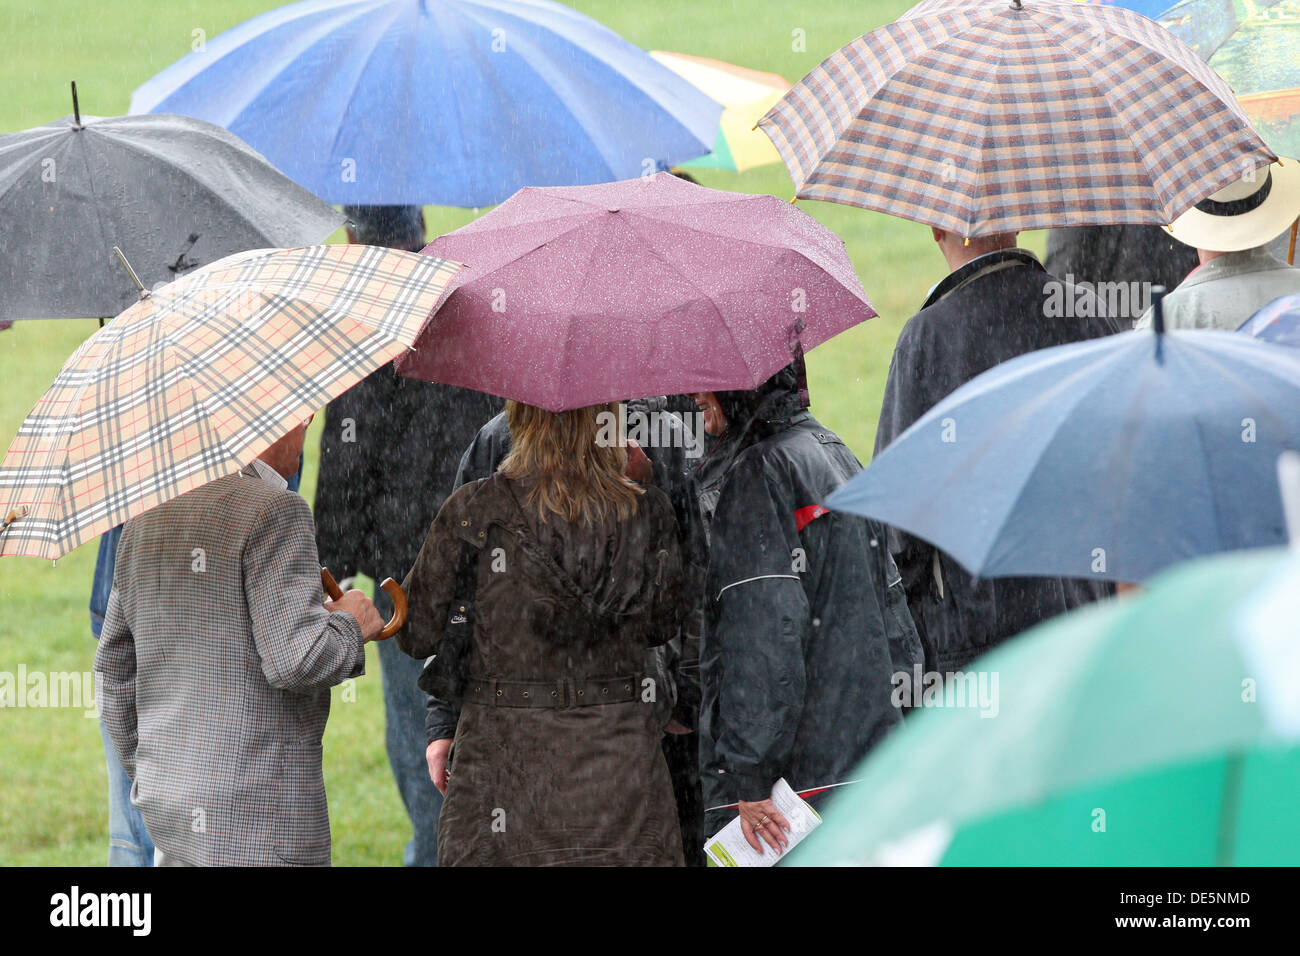 Duesseldorf, Germany, people are in bad weather under their umbrellas Stock Photo